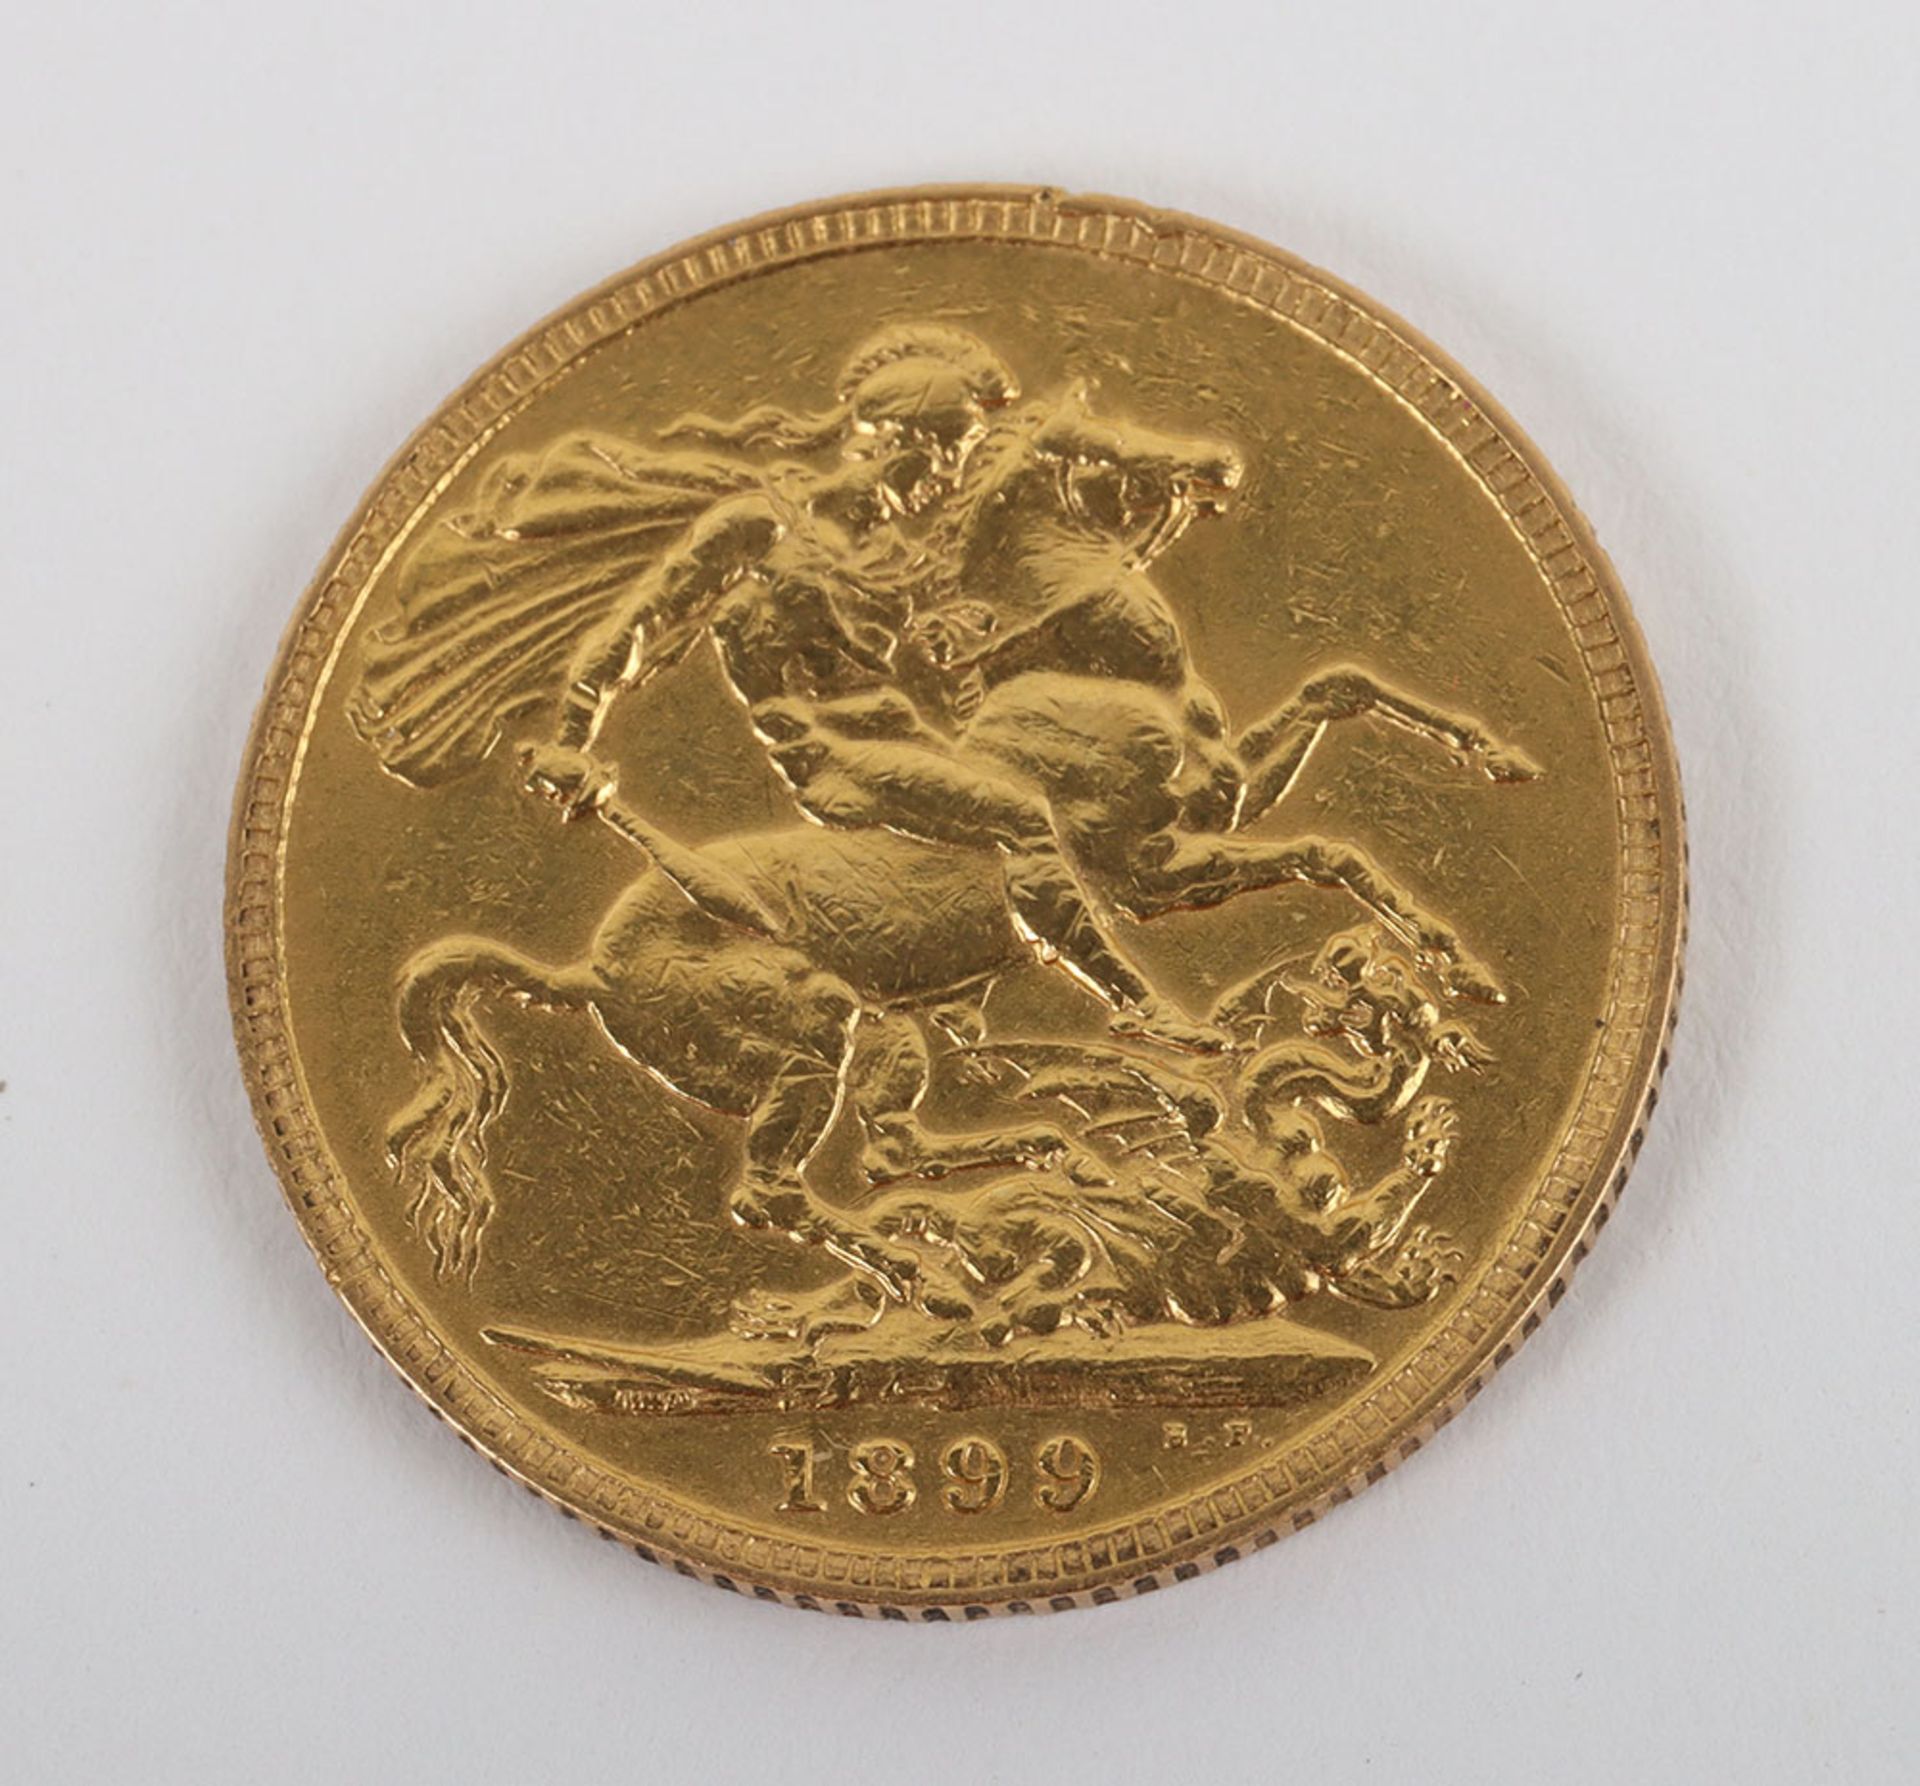 Victoria (1837-1901) Sovereign 1899 - Image 4 of 5